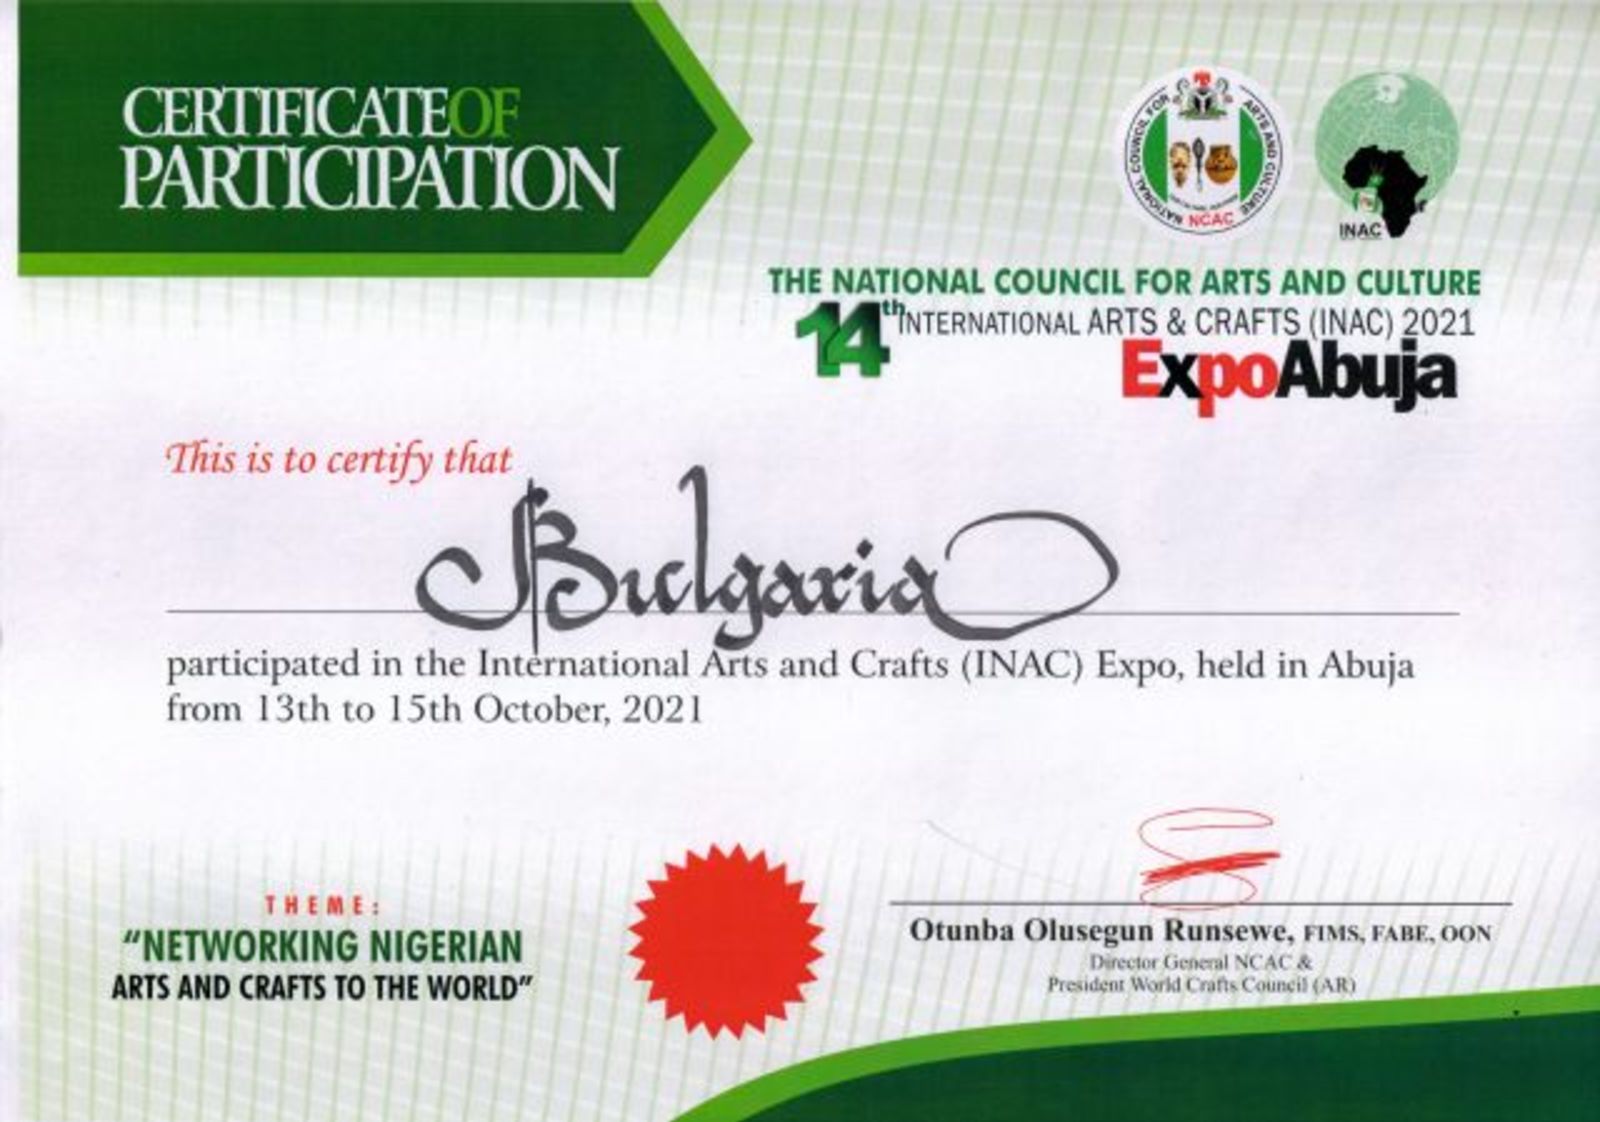 Bulgarian cultural and historical heritage presented during the XIV International Arts and Crafts Expo Abuja 2021